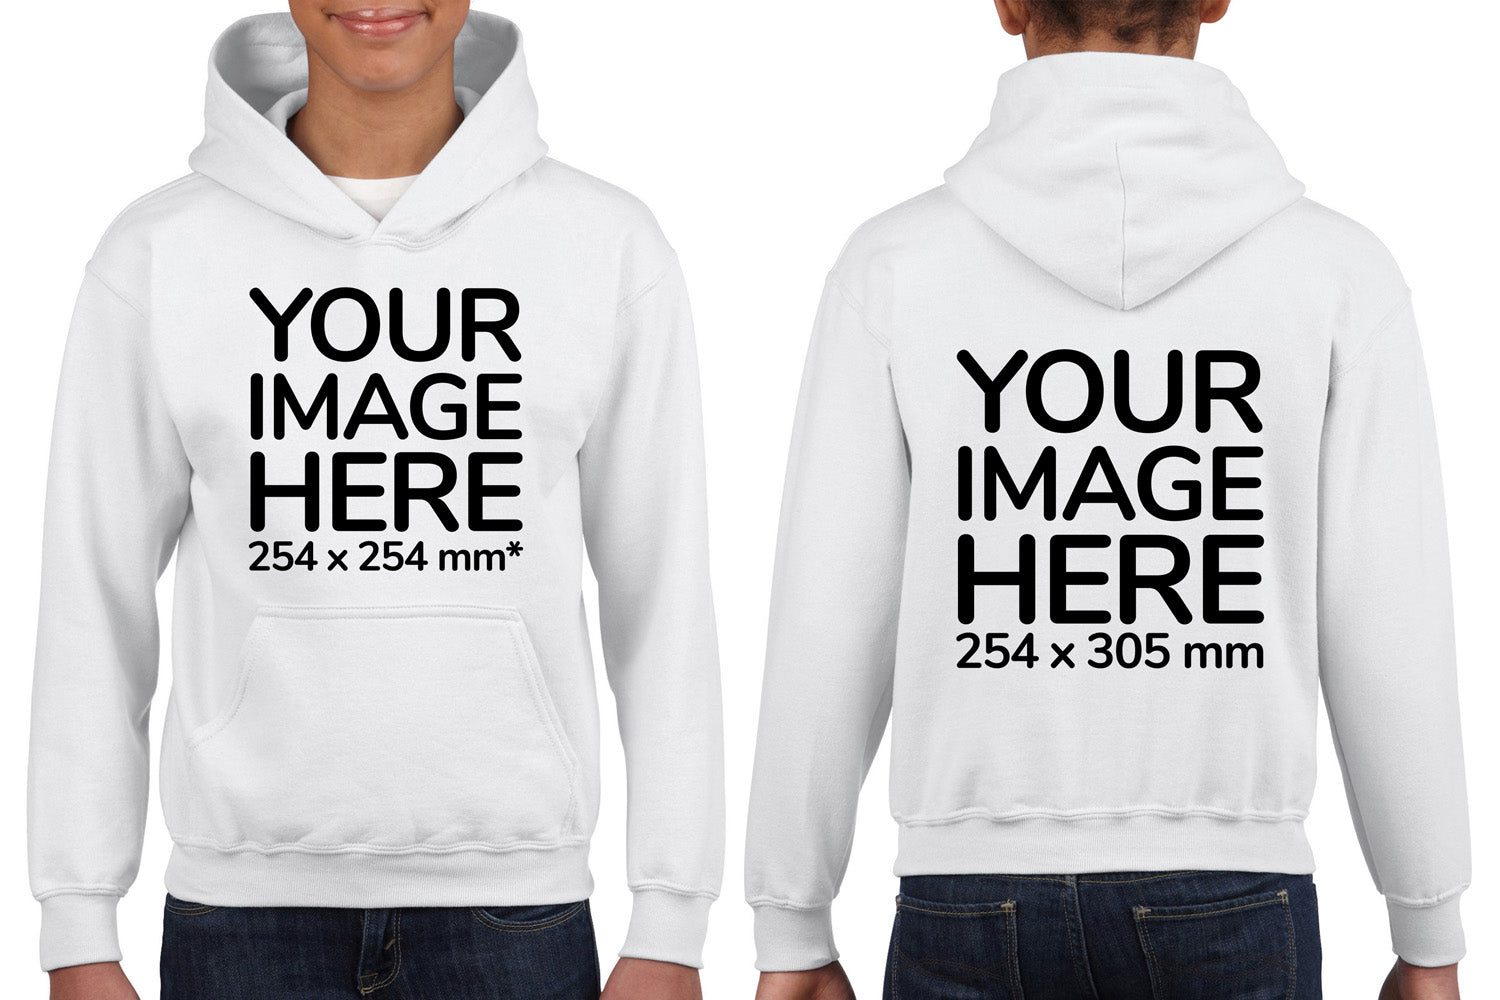 White Kids Hoodies - with image area on front and back